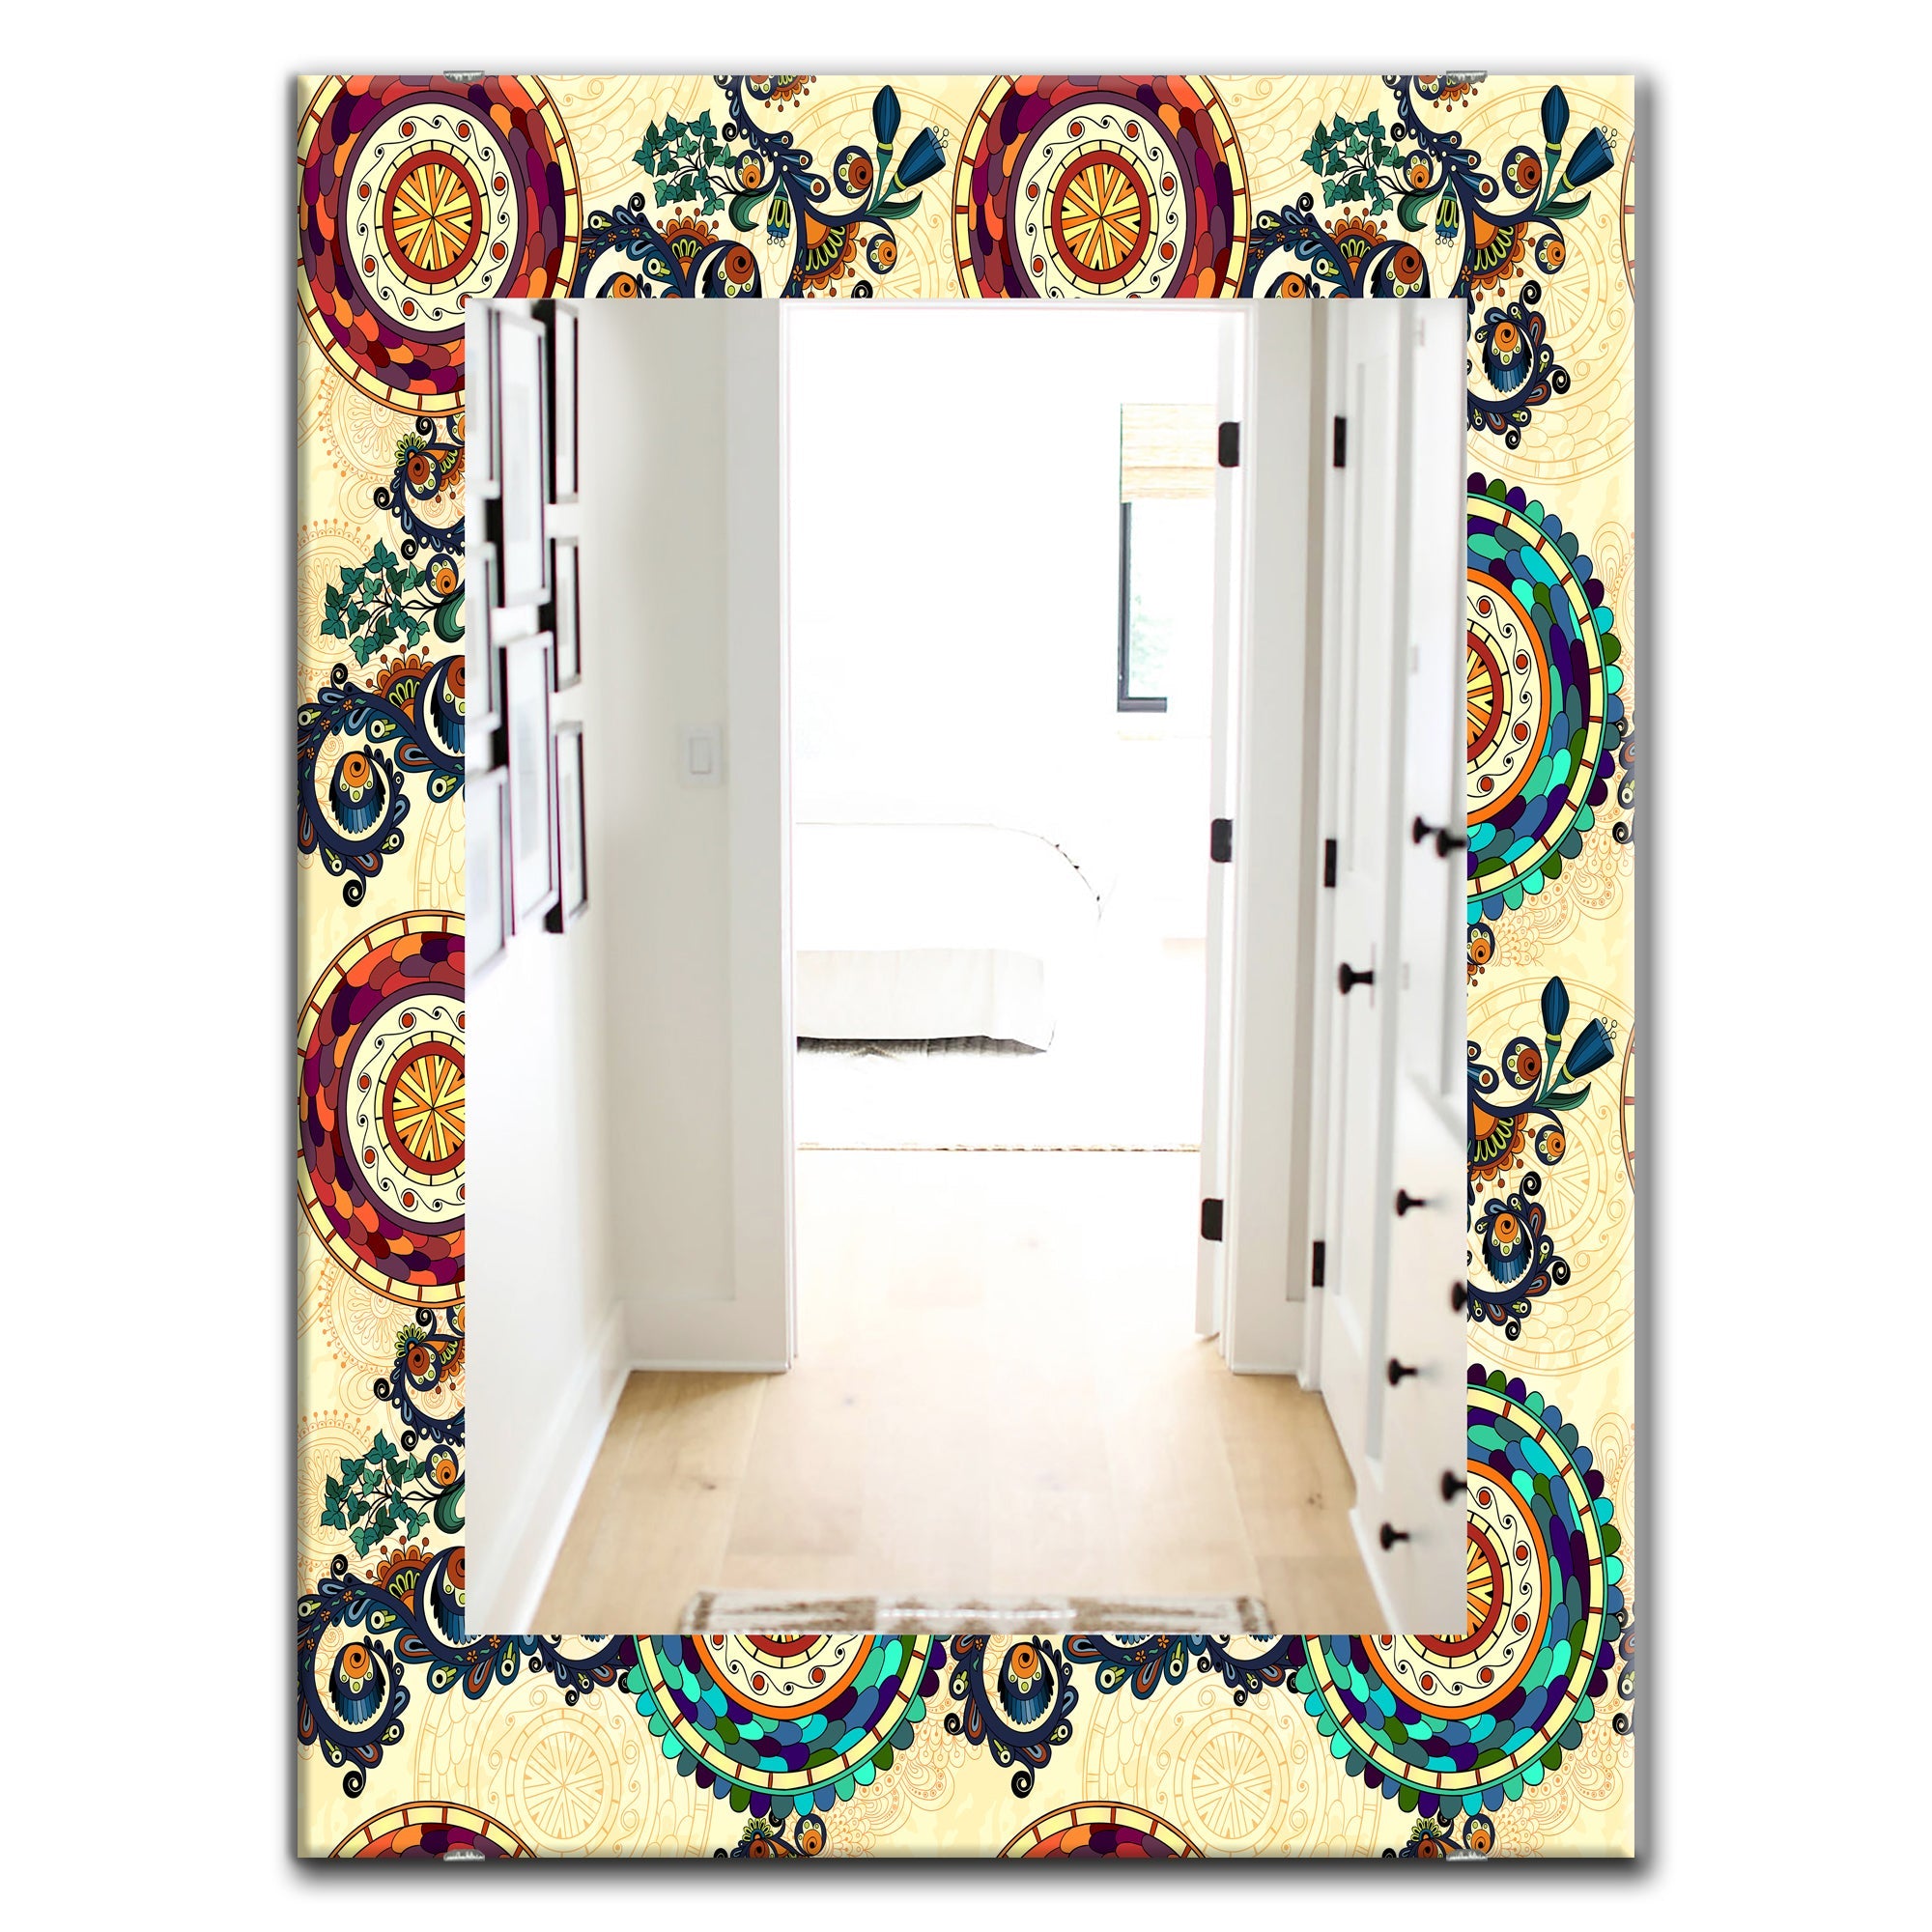 Floral Paisley Ethnic' Bohemian and Eclectic Mirror - Oval or Round Wall Mirror